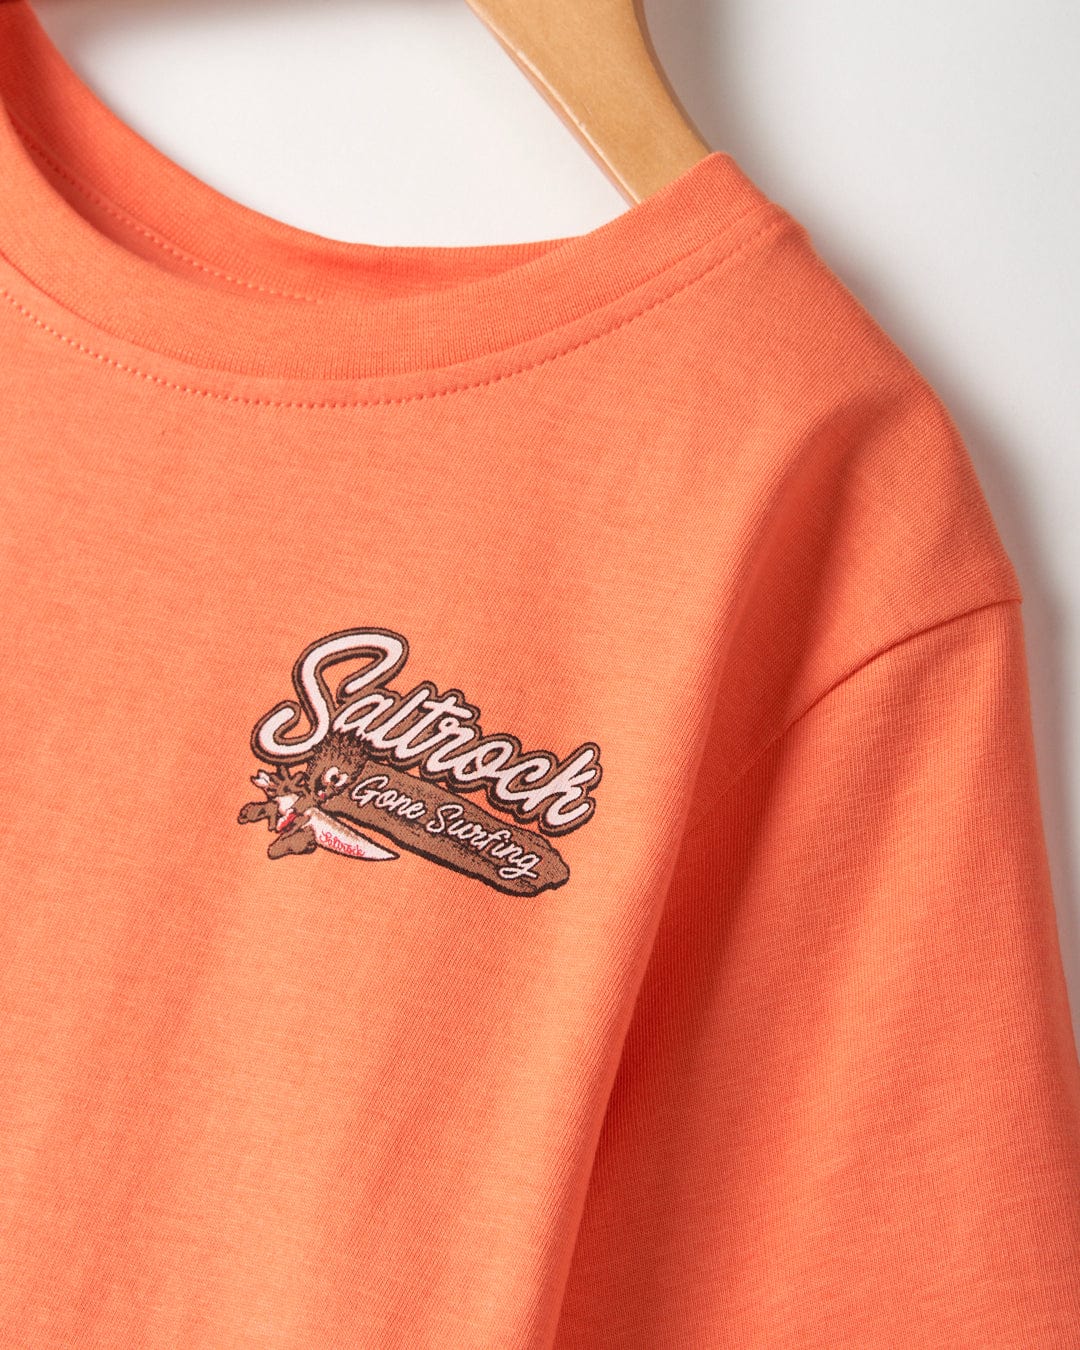 A 100% cotton orange t-shirt with a Beach Signs Cornwall branding logo on it.